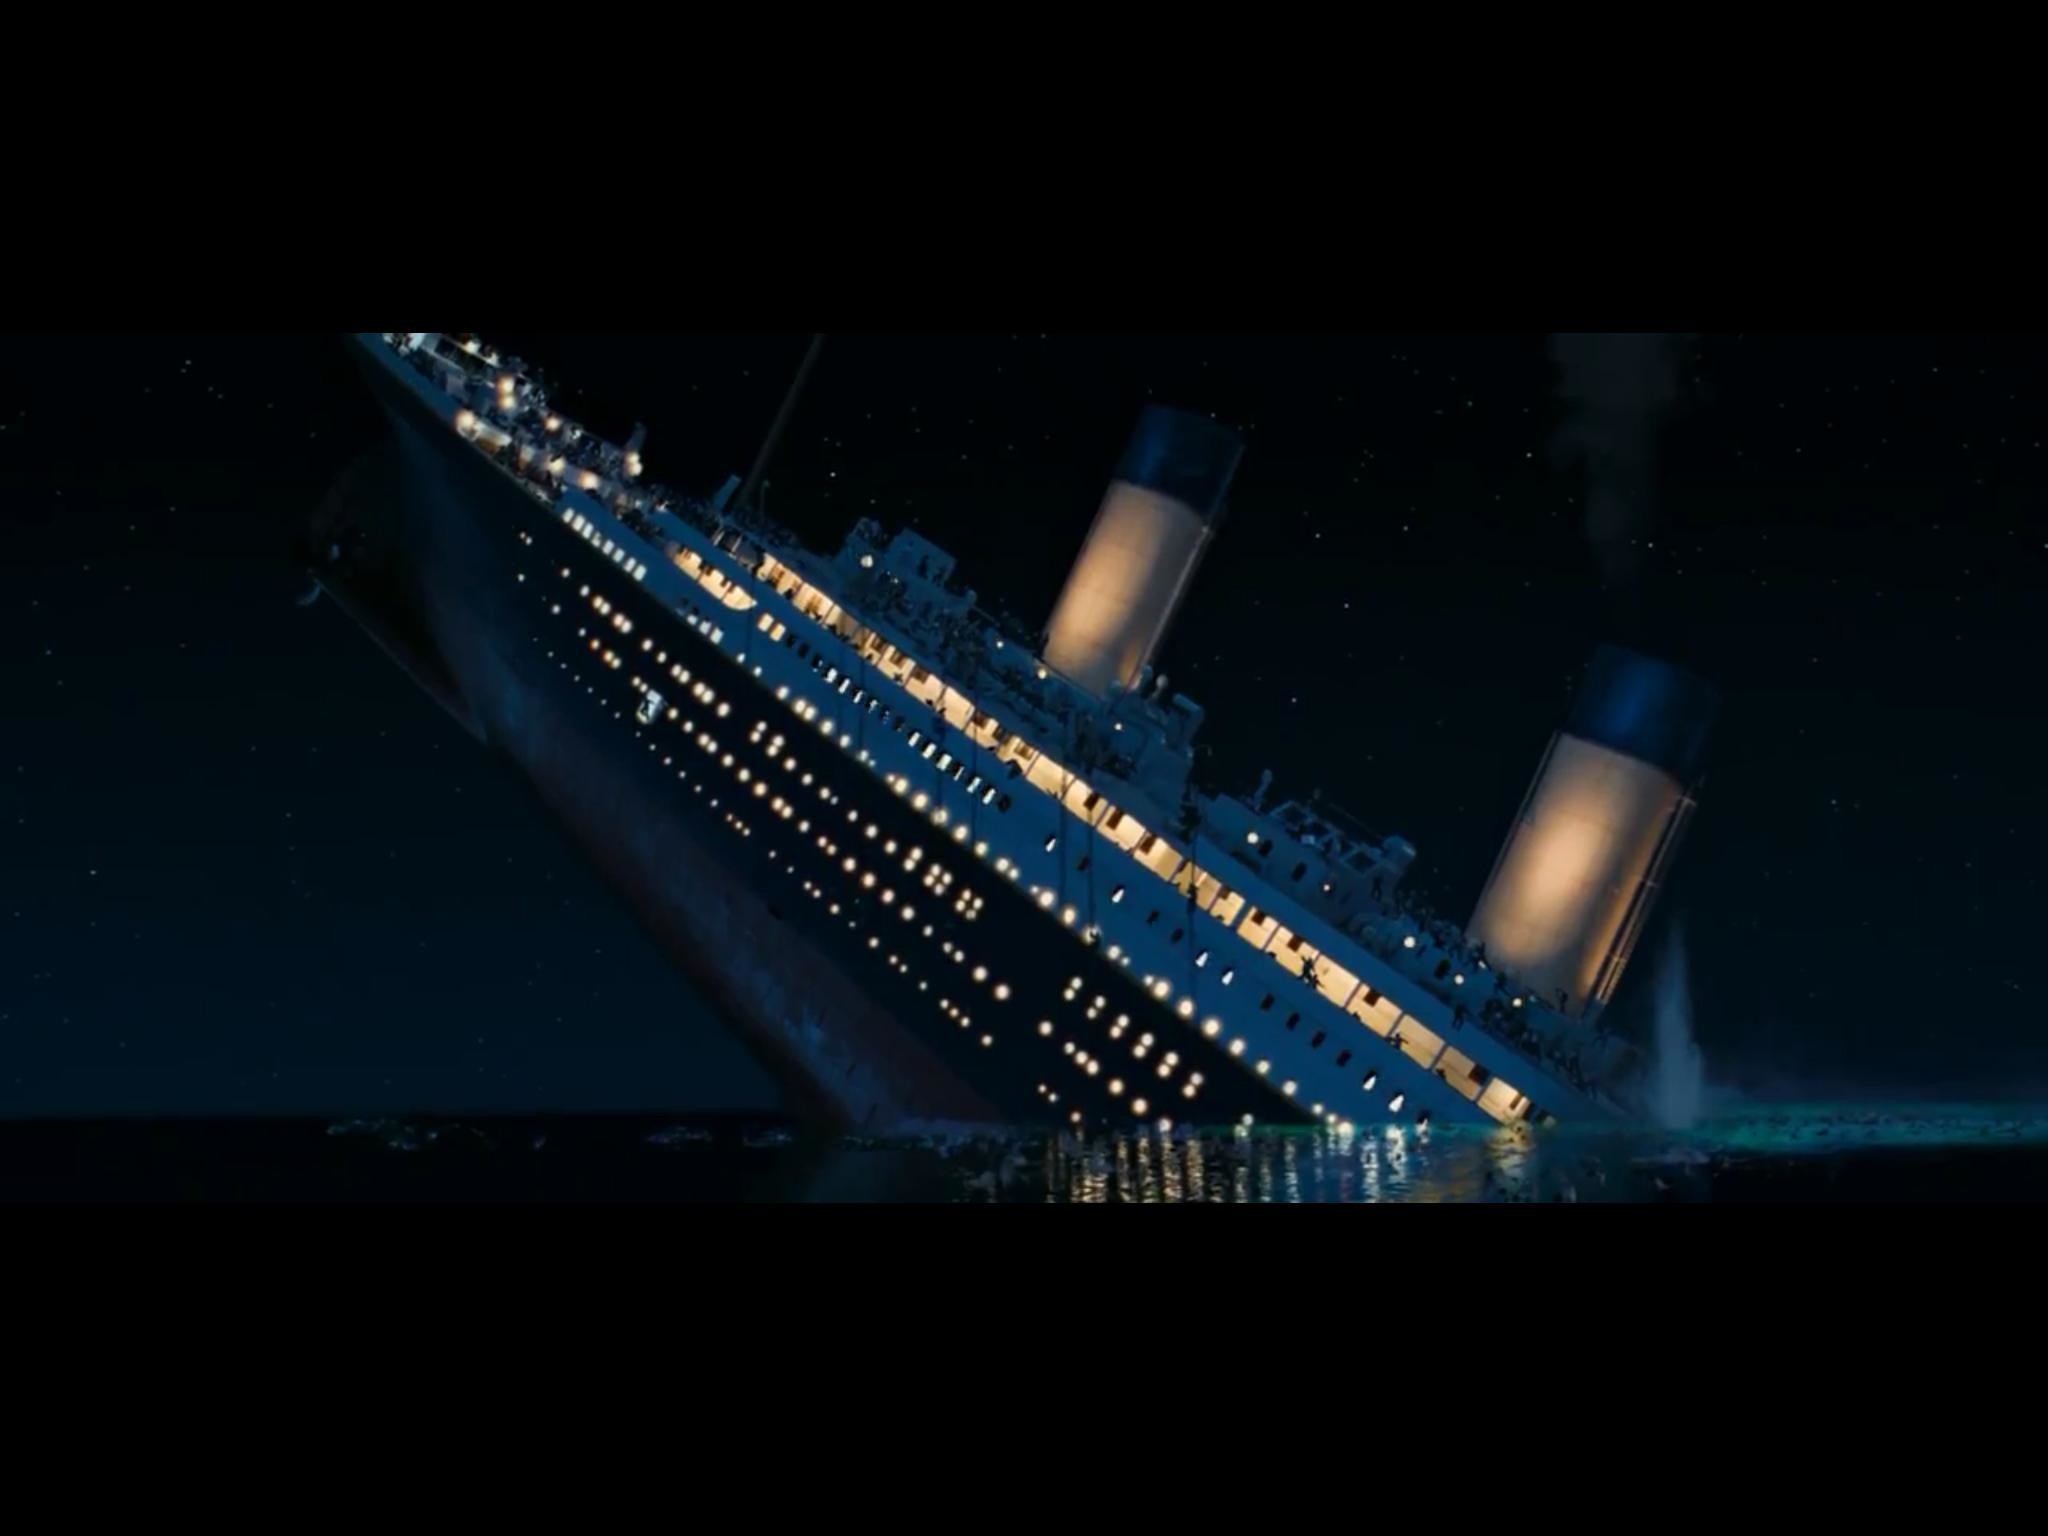 Titanic Sinking Wallpaper Background Pictures